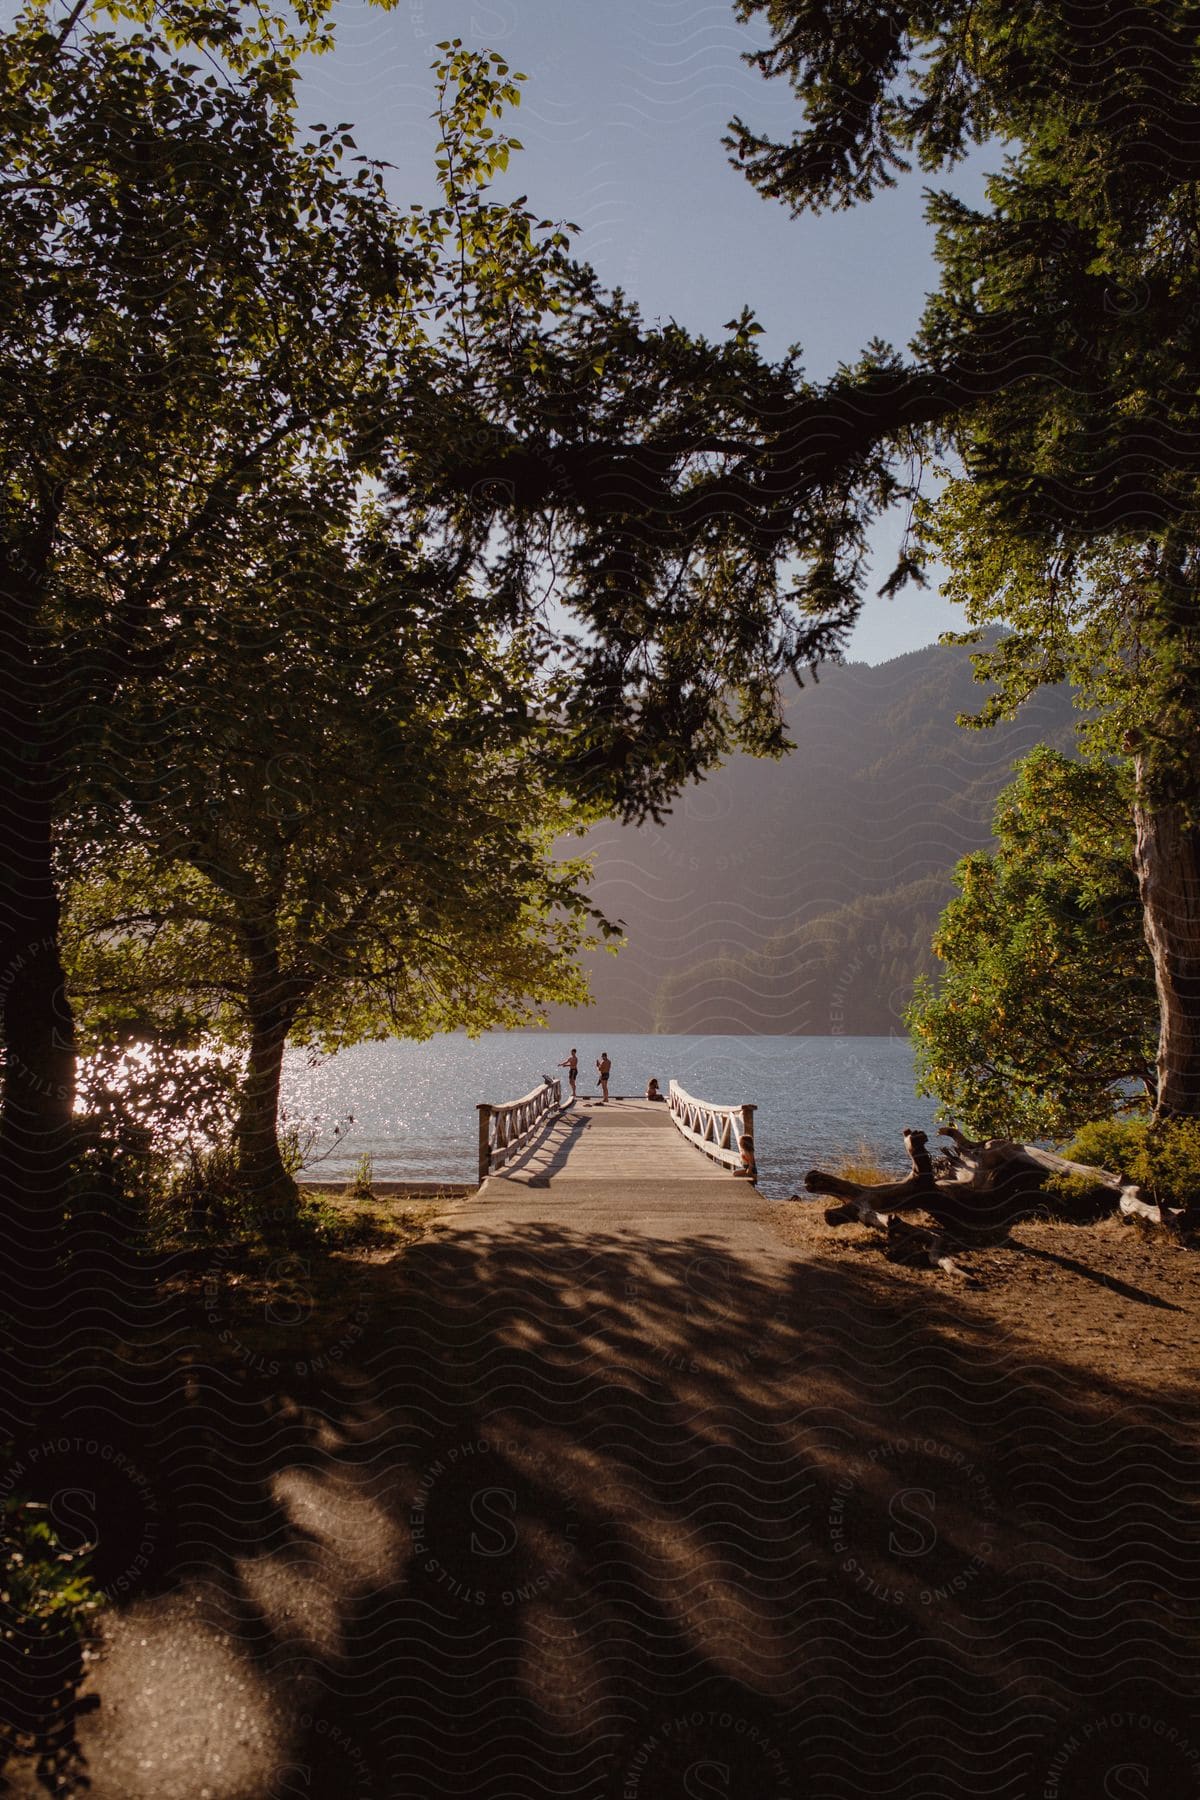 People on a pier overlooking water with forested mountains in the distance